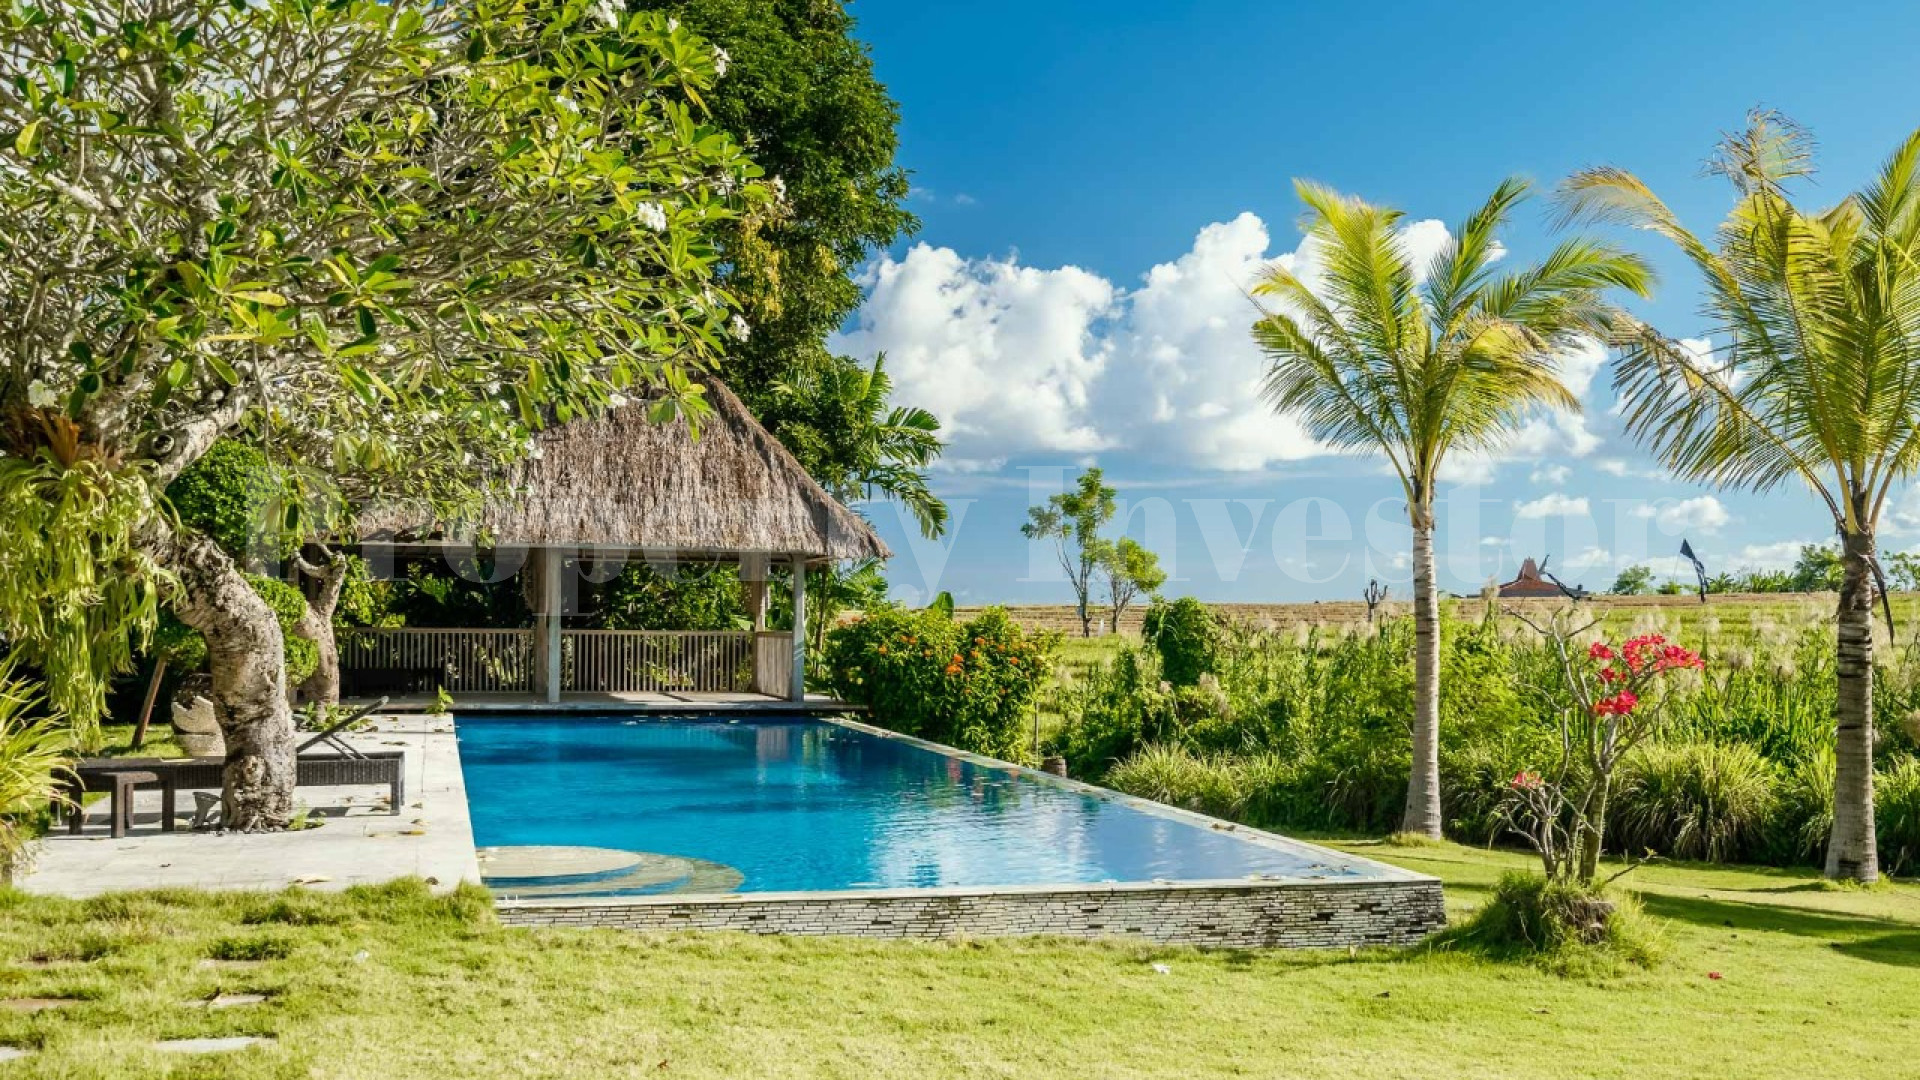 Spacious 6 Bedroom Modern Villa with Lush Gardens & Amazing Sunset Views for Sale in Pererenan, Bali